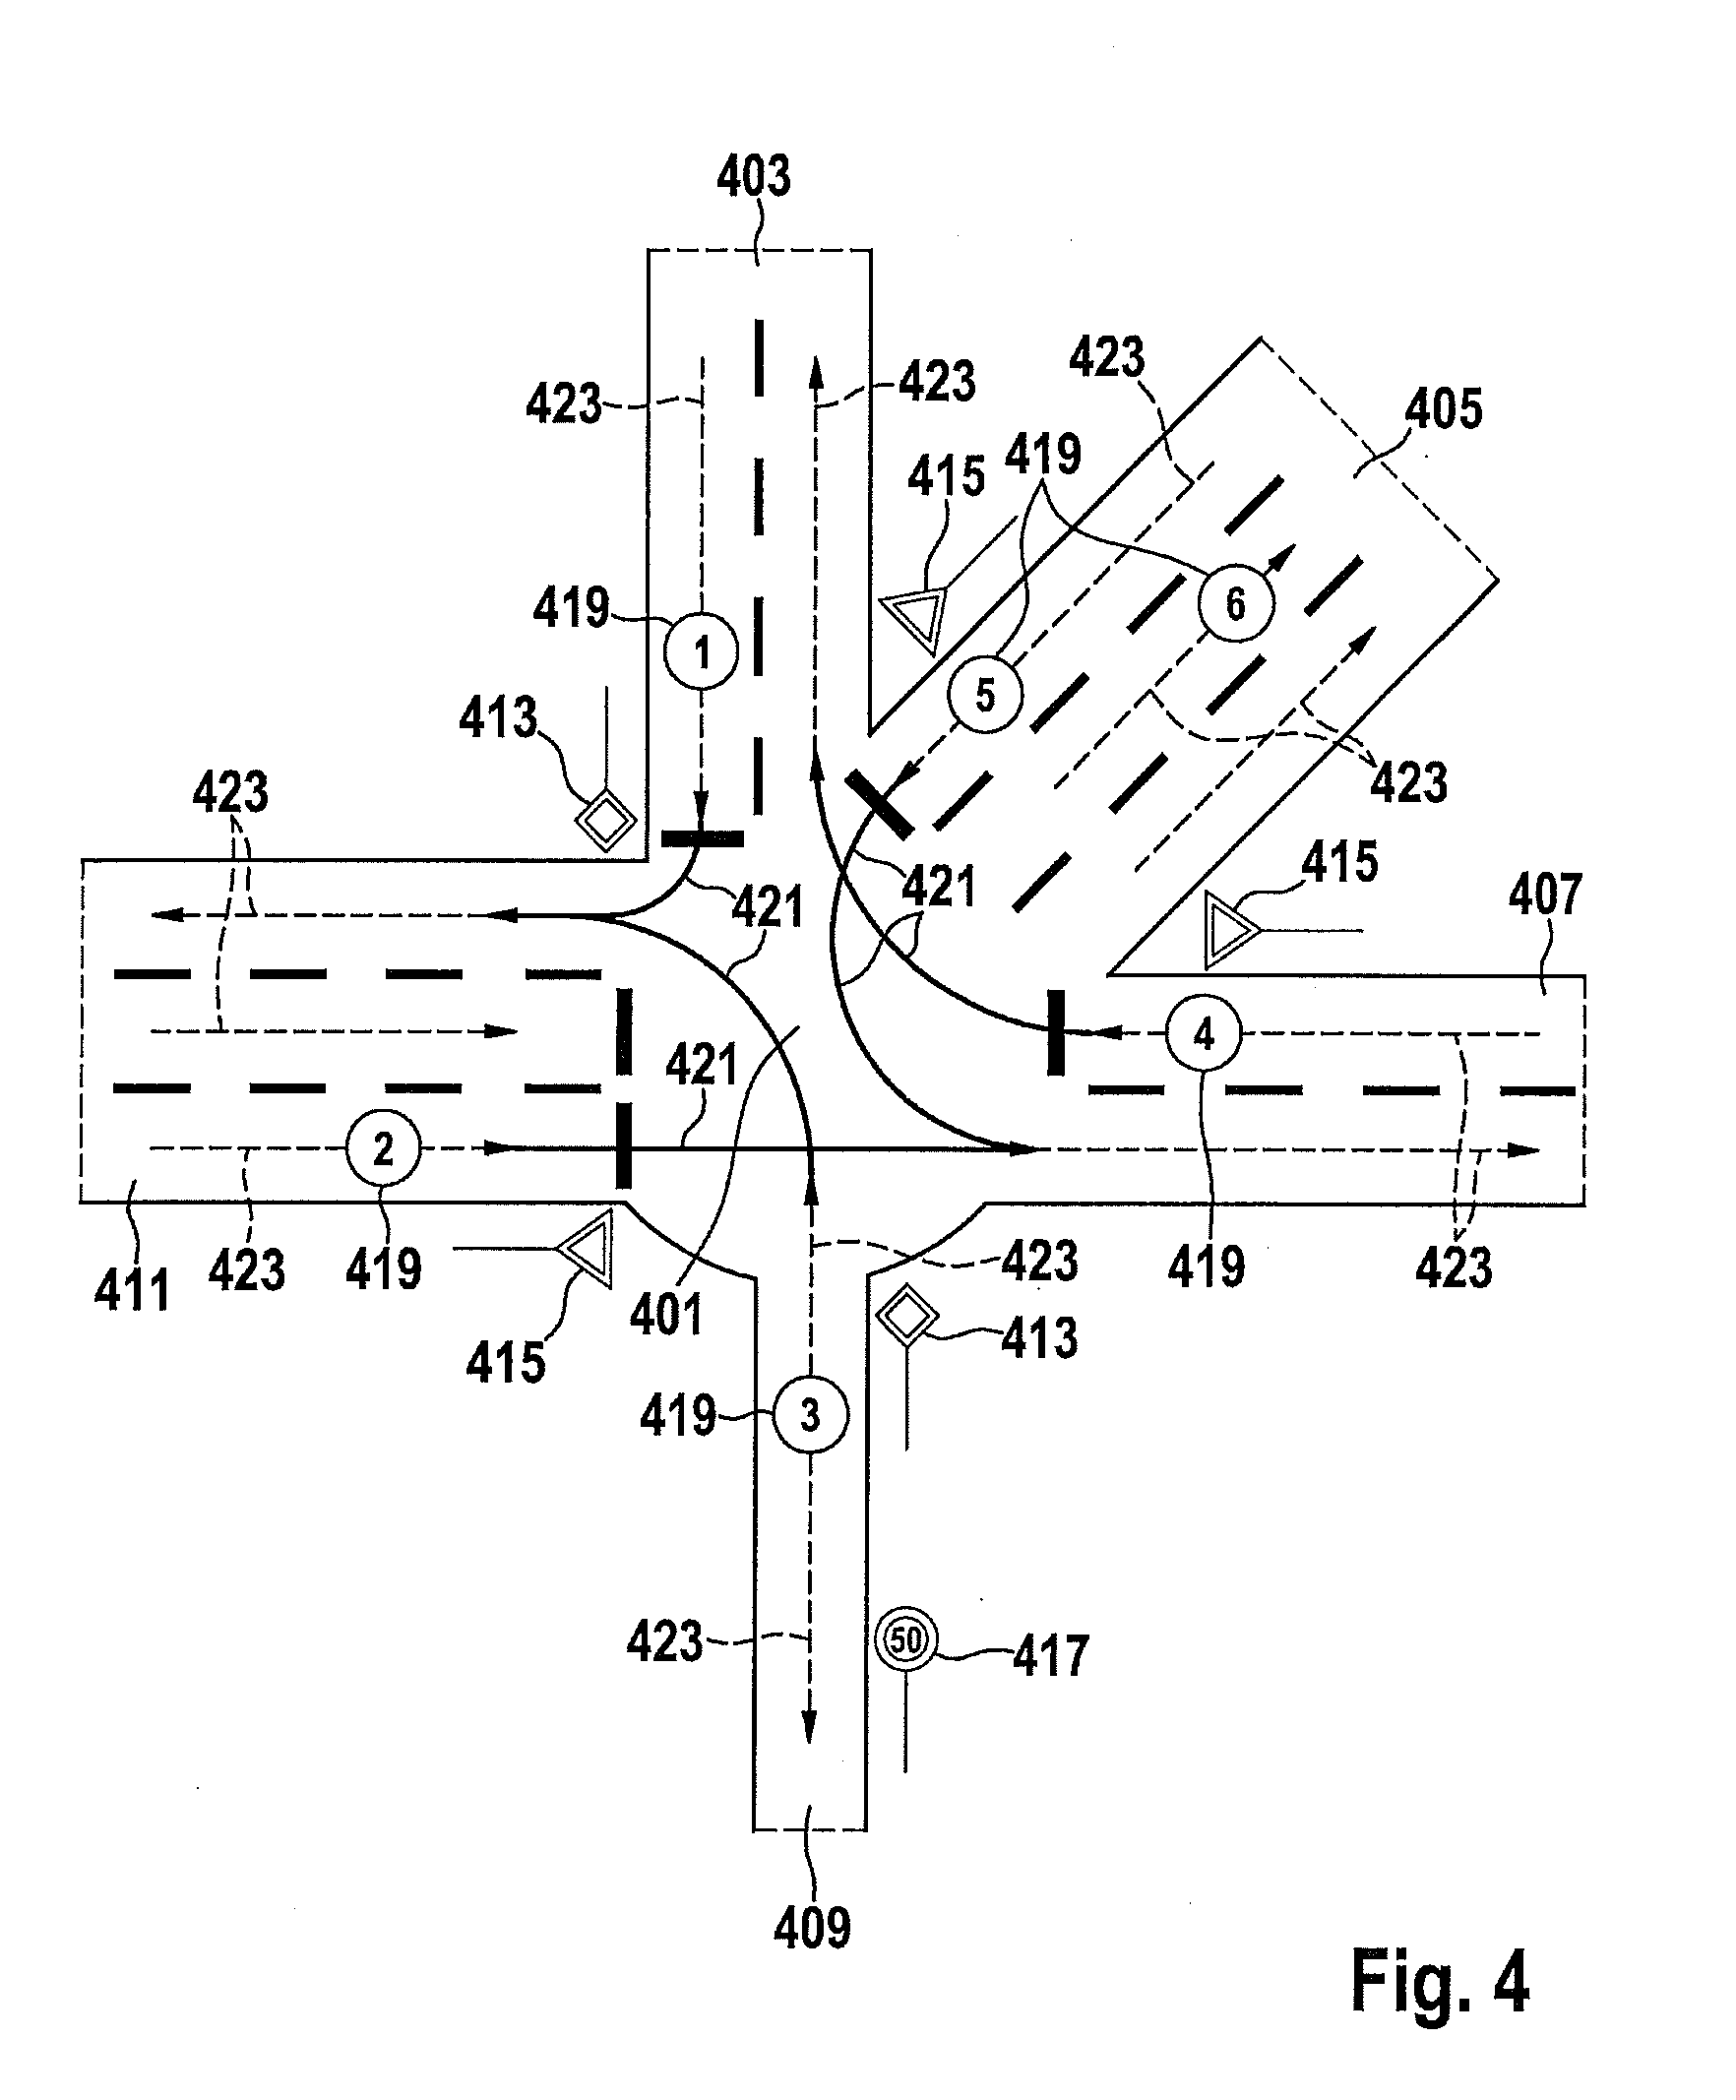 Driver assistance system and method for operating a driver assistance system